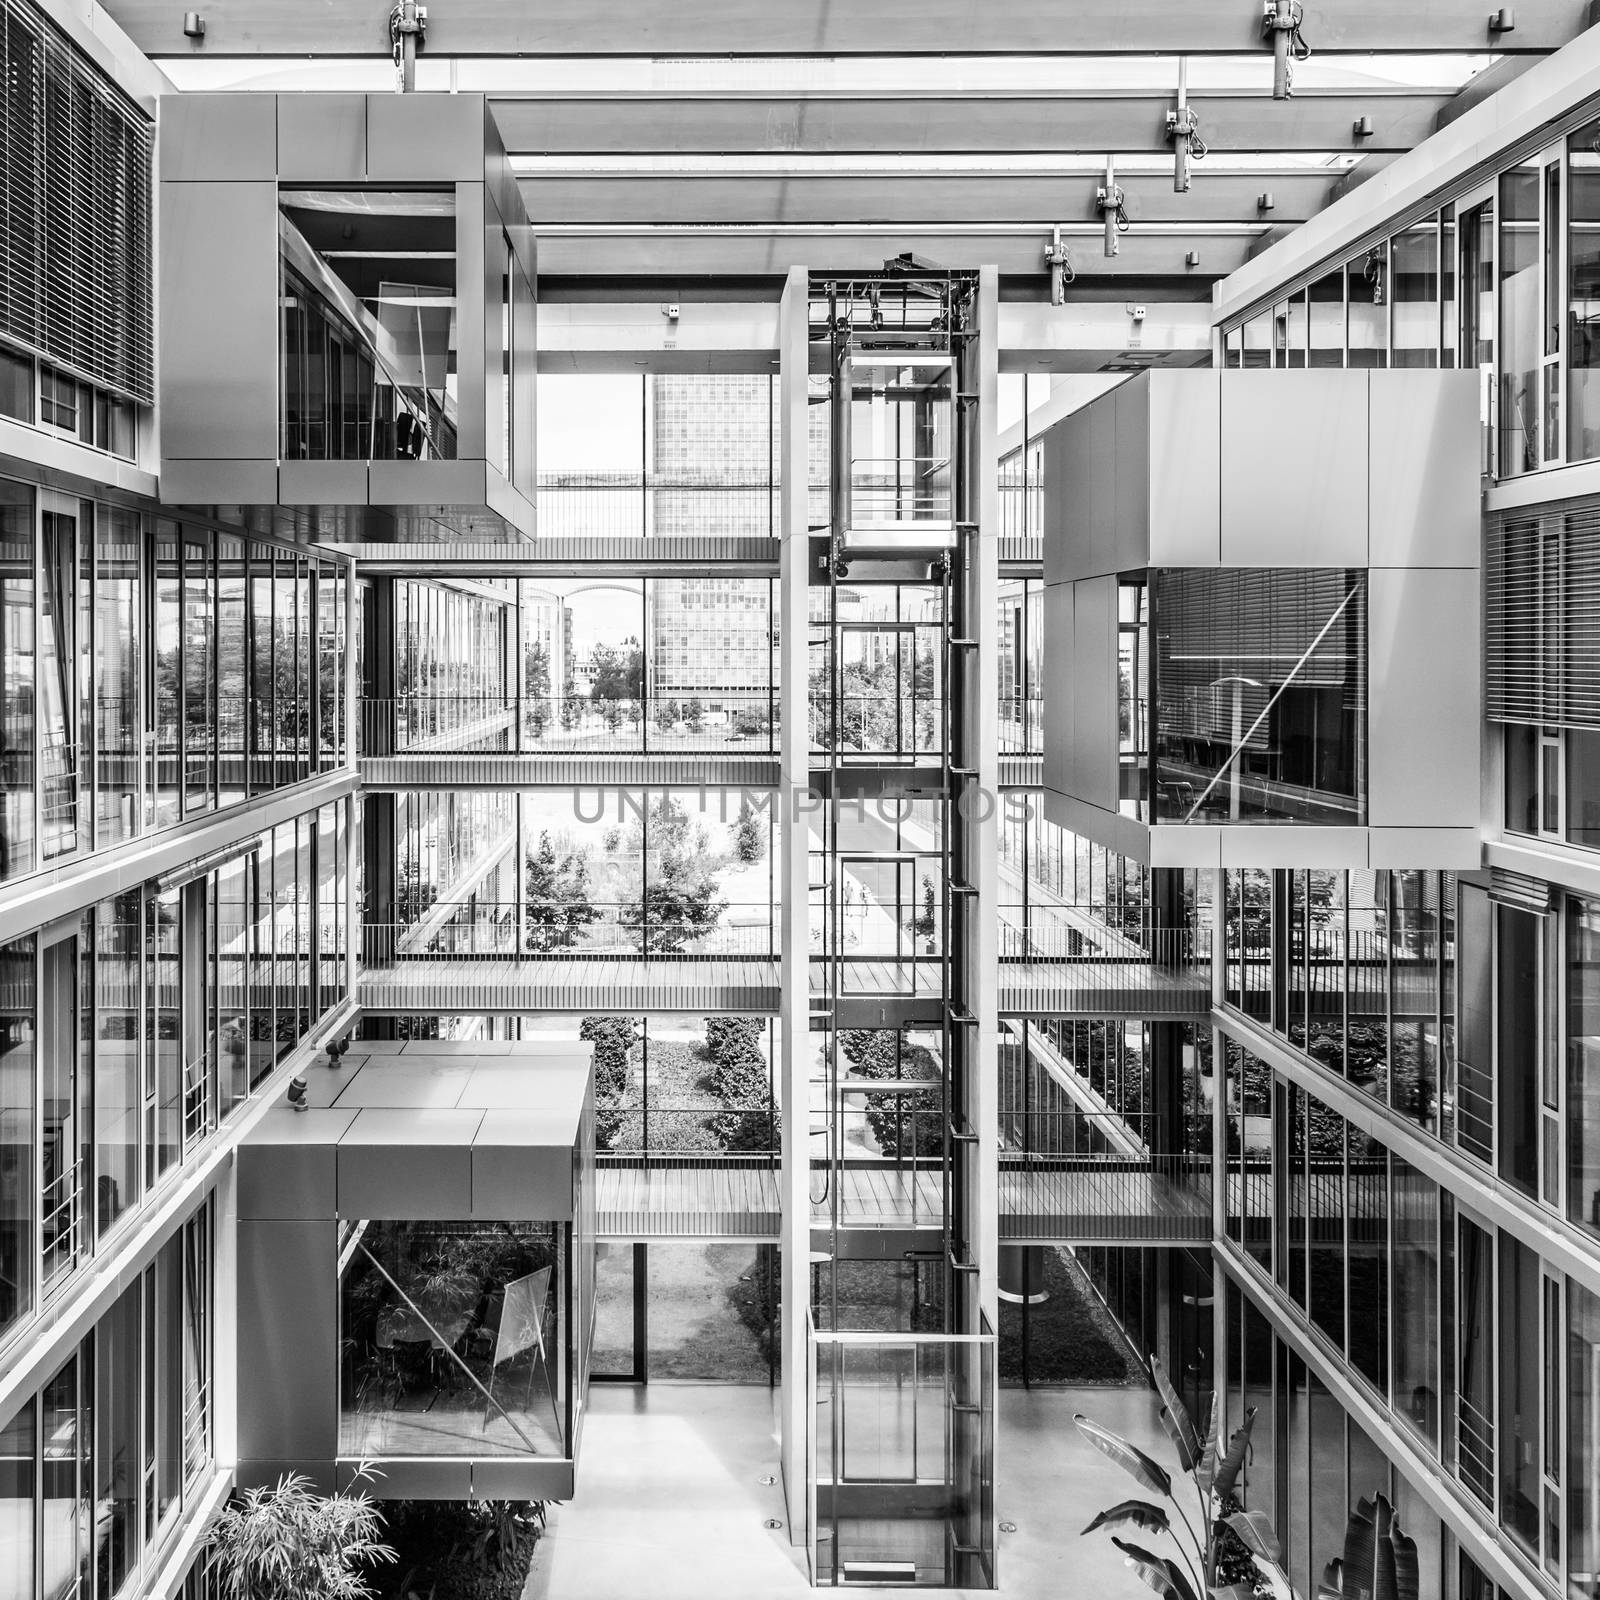 Main hall, staircase and windows of morden office building. Contemporary corporate business architecture. Munich Trading and Technology Centre. Black and white image.